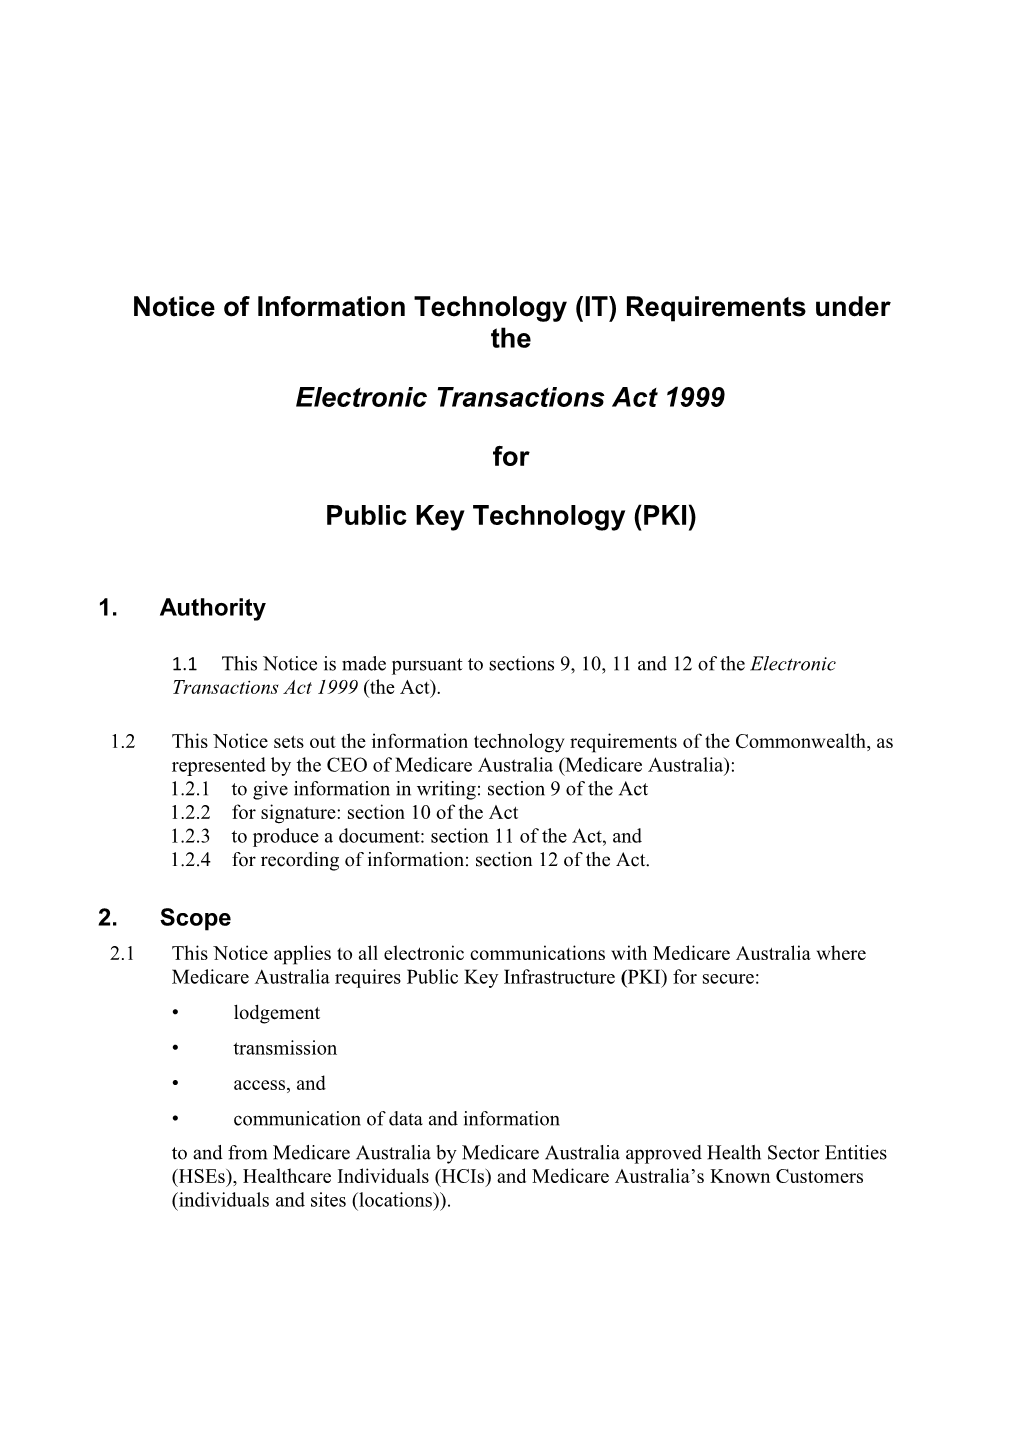 Notice of Information Technology (IT) Requirements - Public Key Technology (PKI)